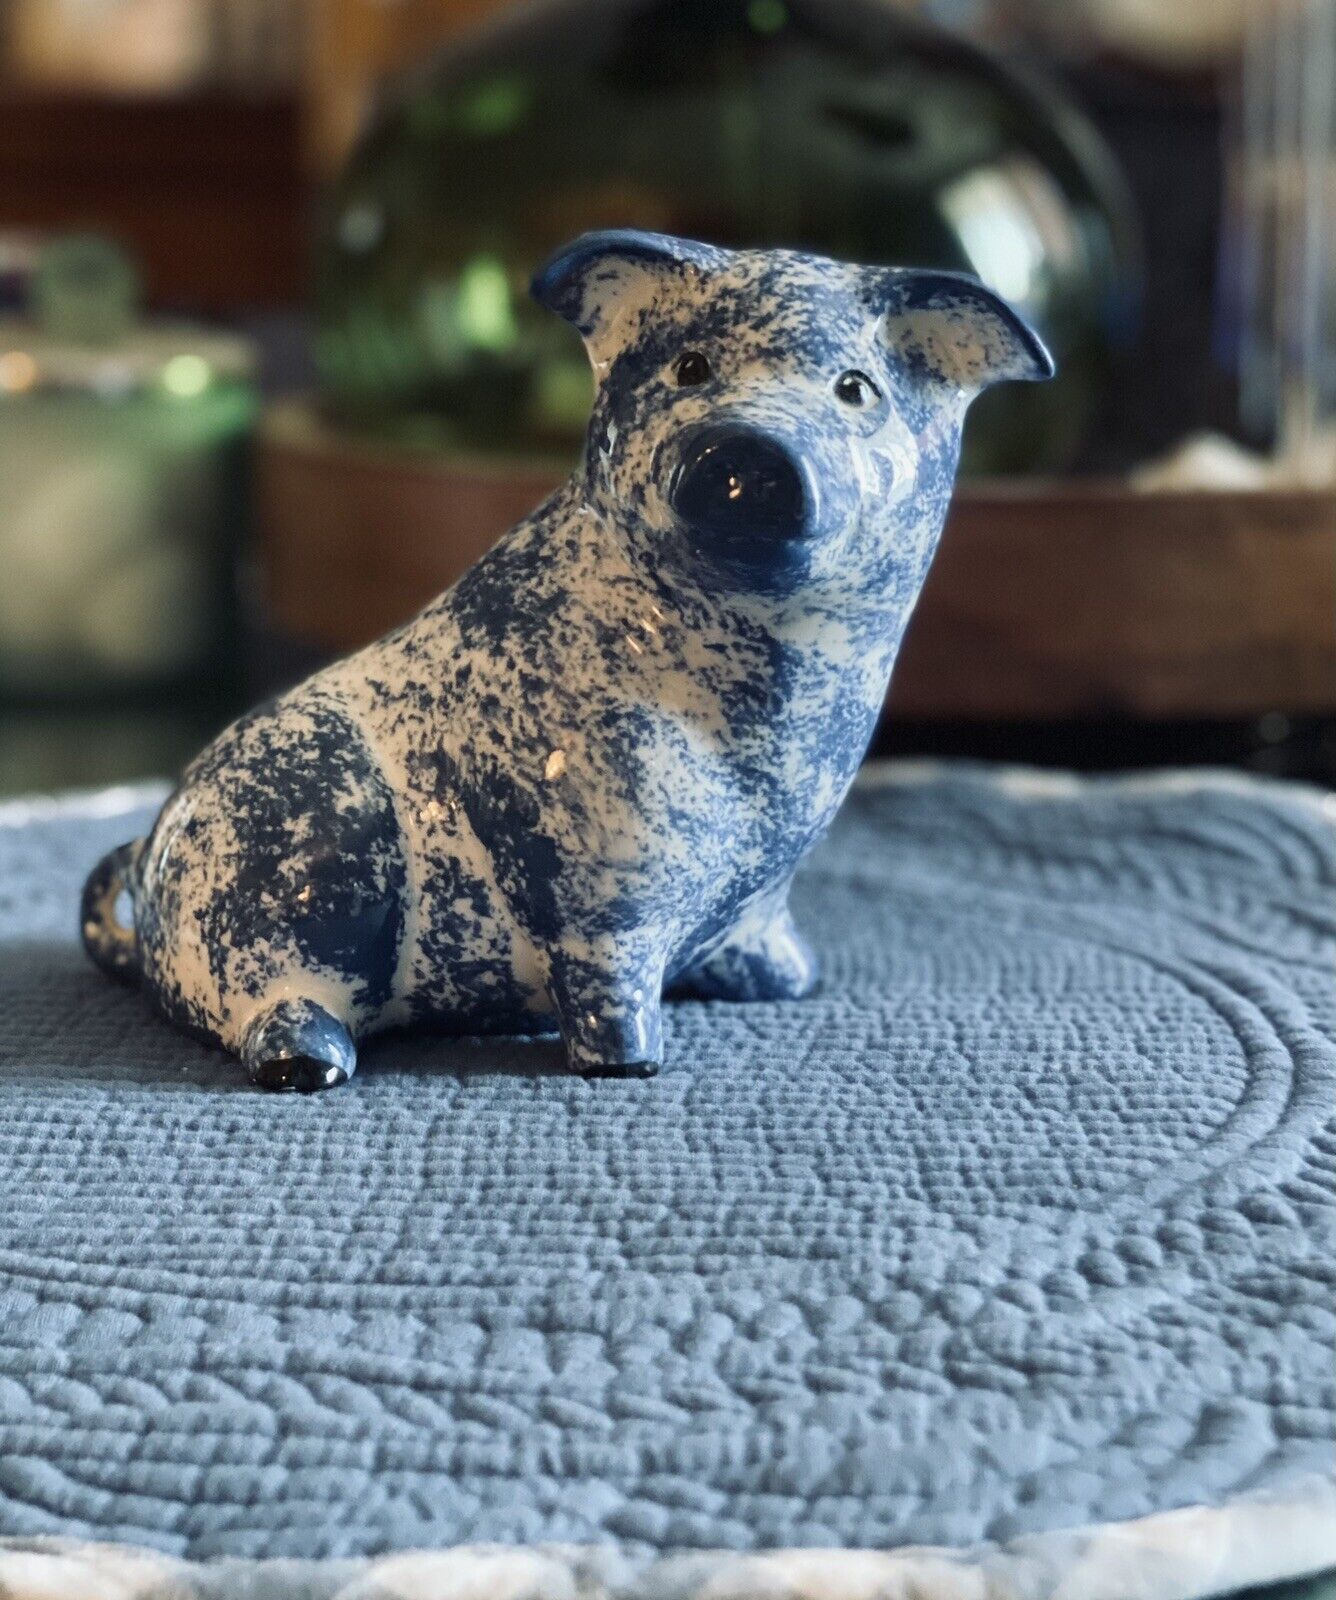 Blue Pig Figurine. Farm Style. Beautiful And Must Have For Collection